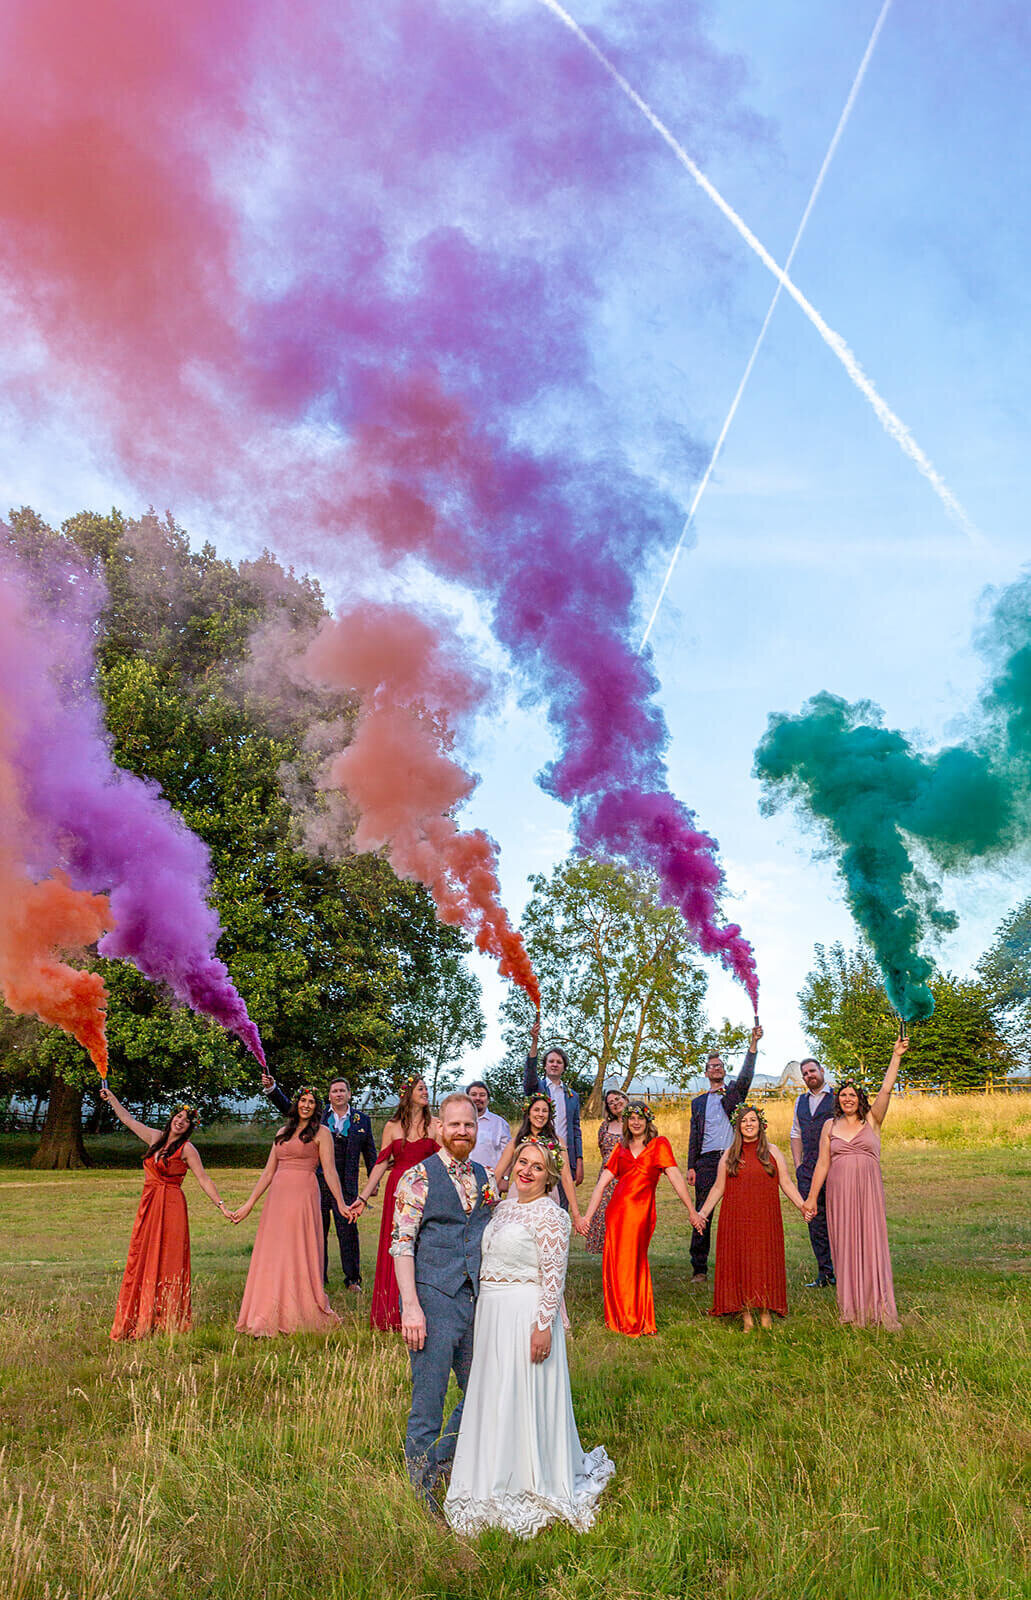 Bride and groom stand in field with wedding party and colour bombs